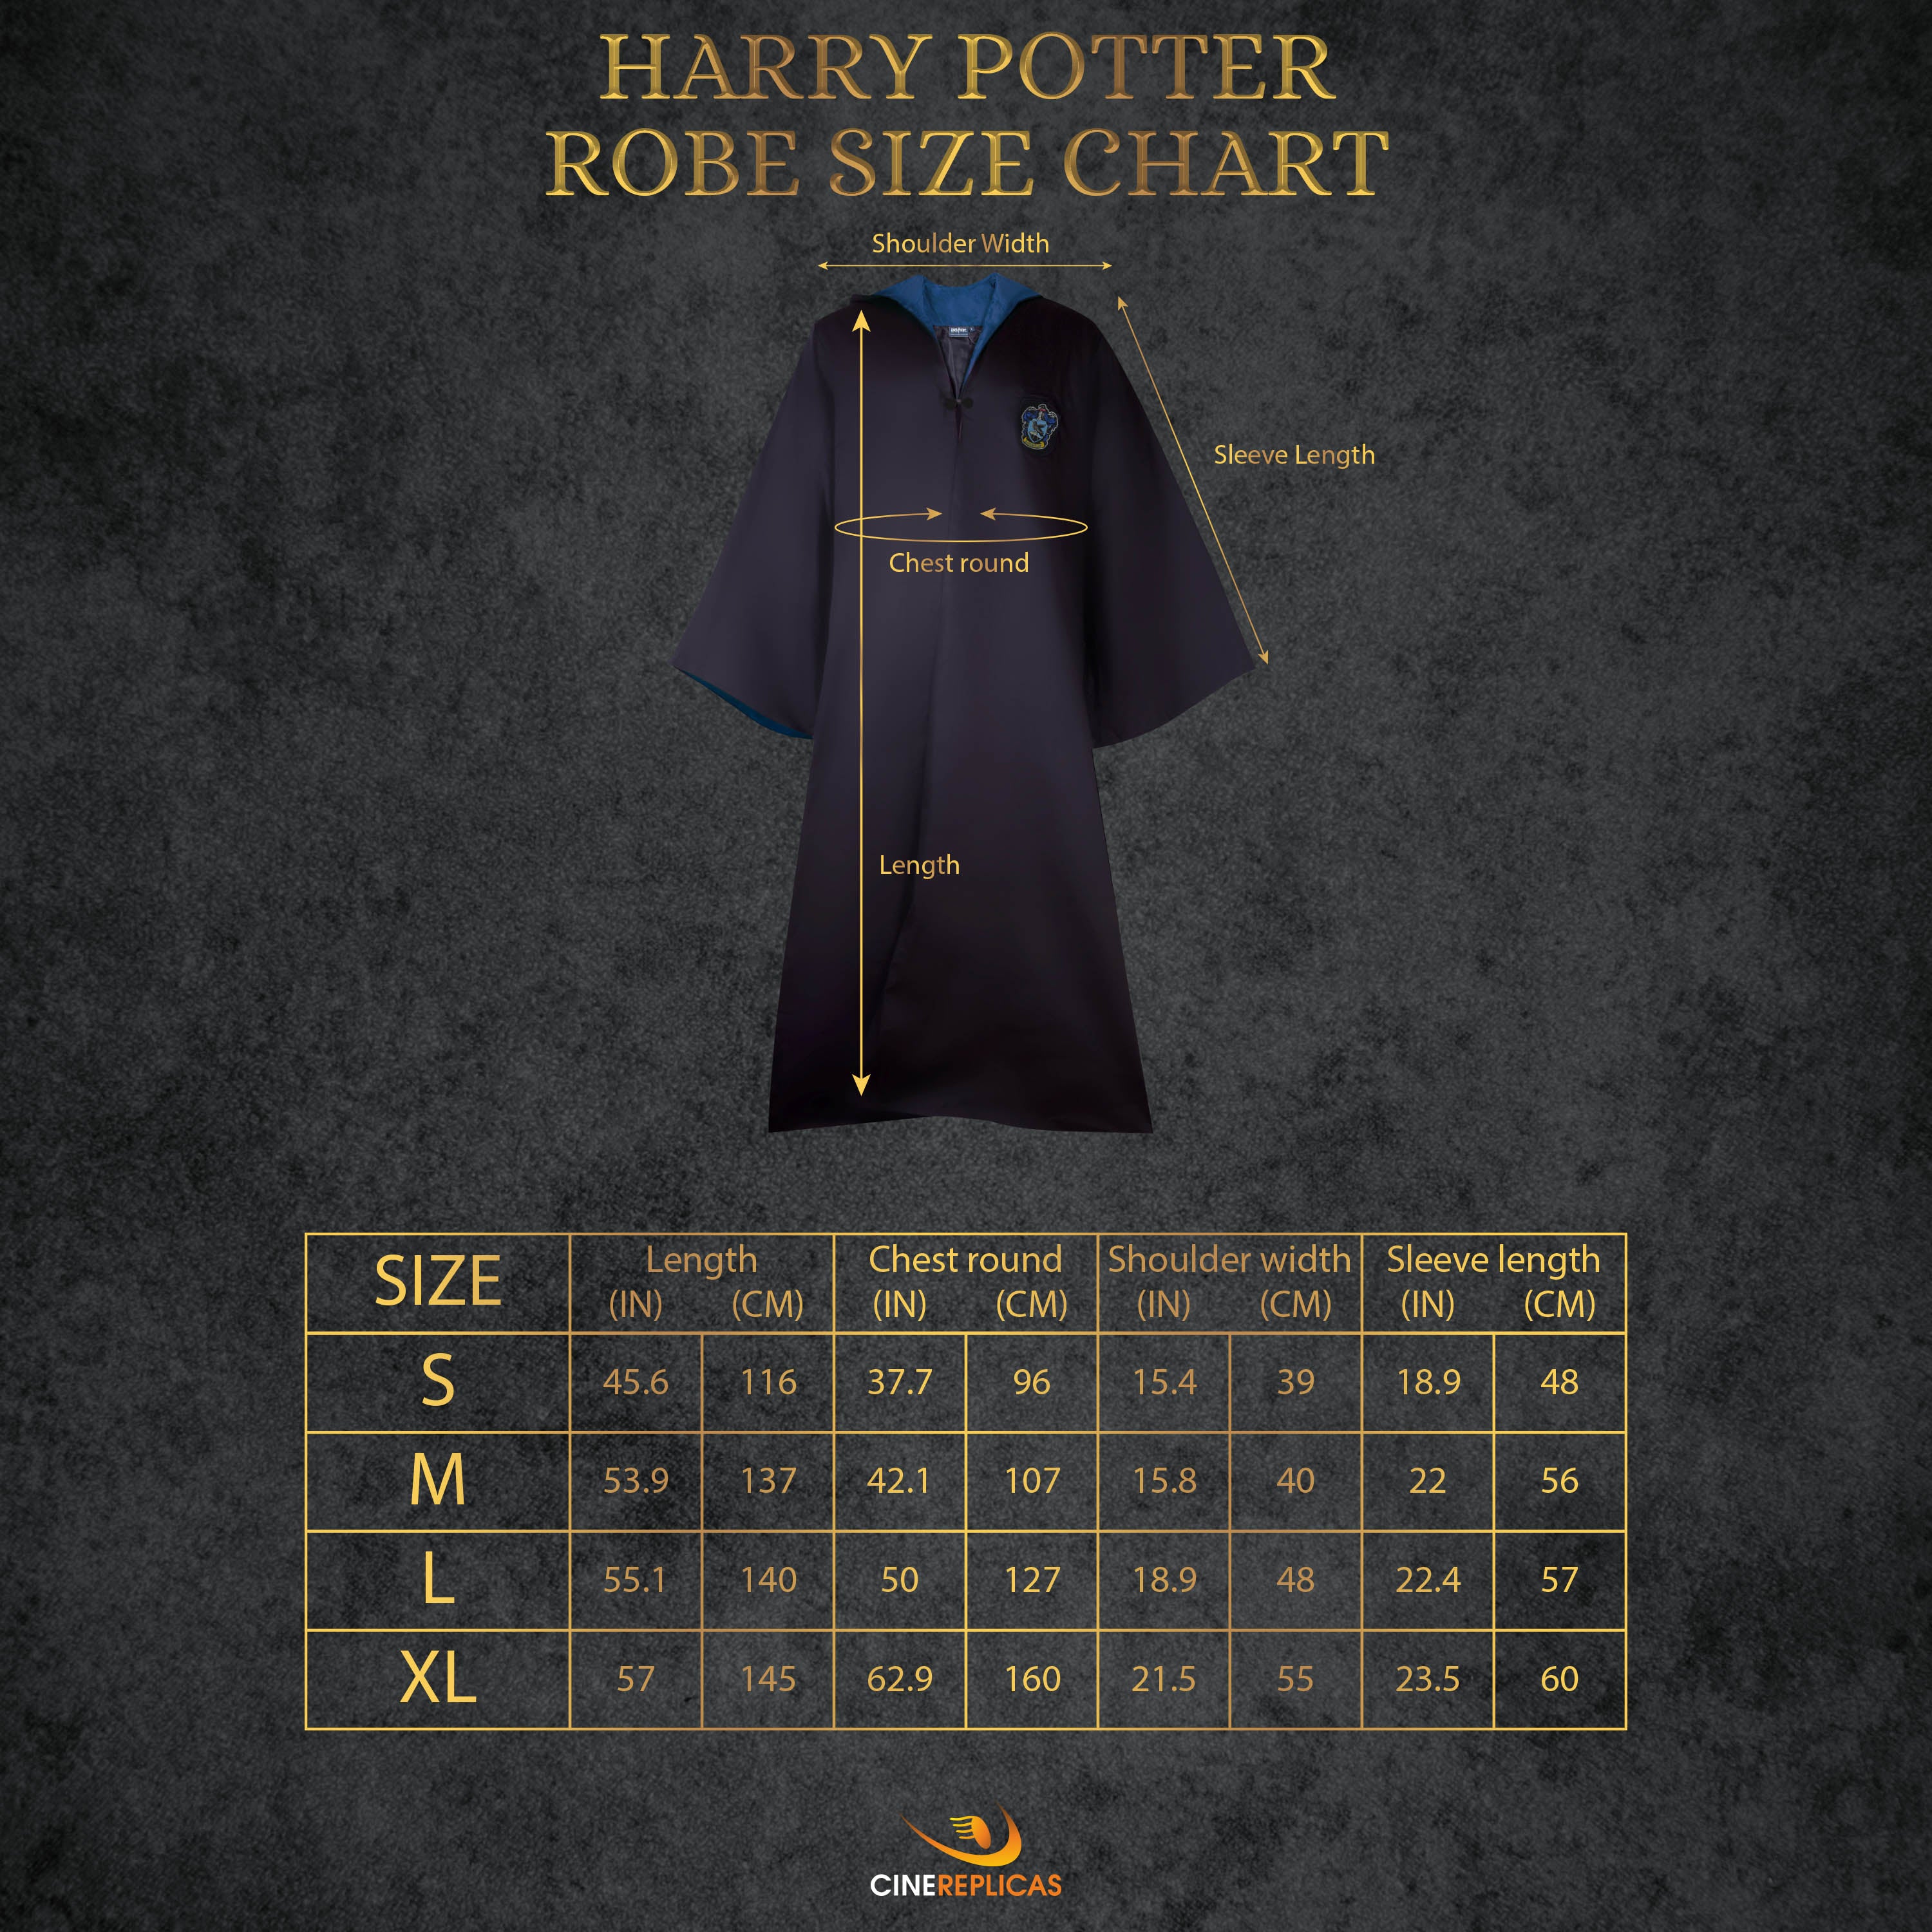 Harry Potter Adult Deluxe Ravenclaw Robe Costume